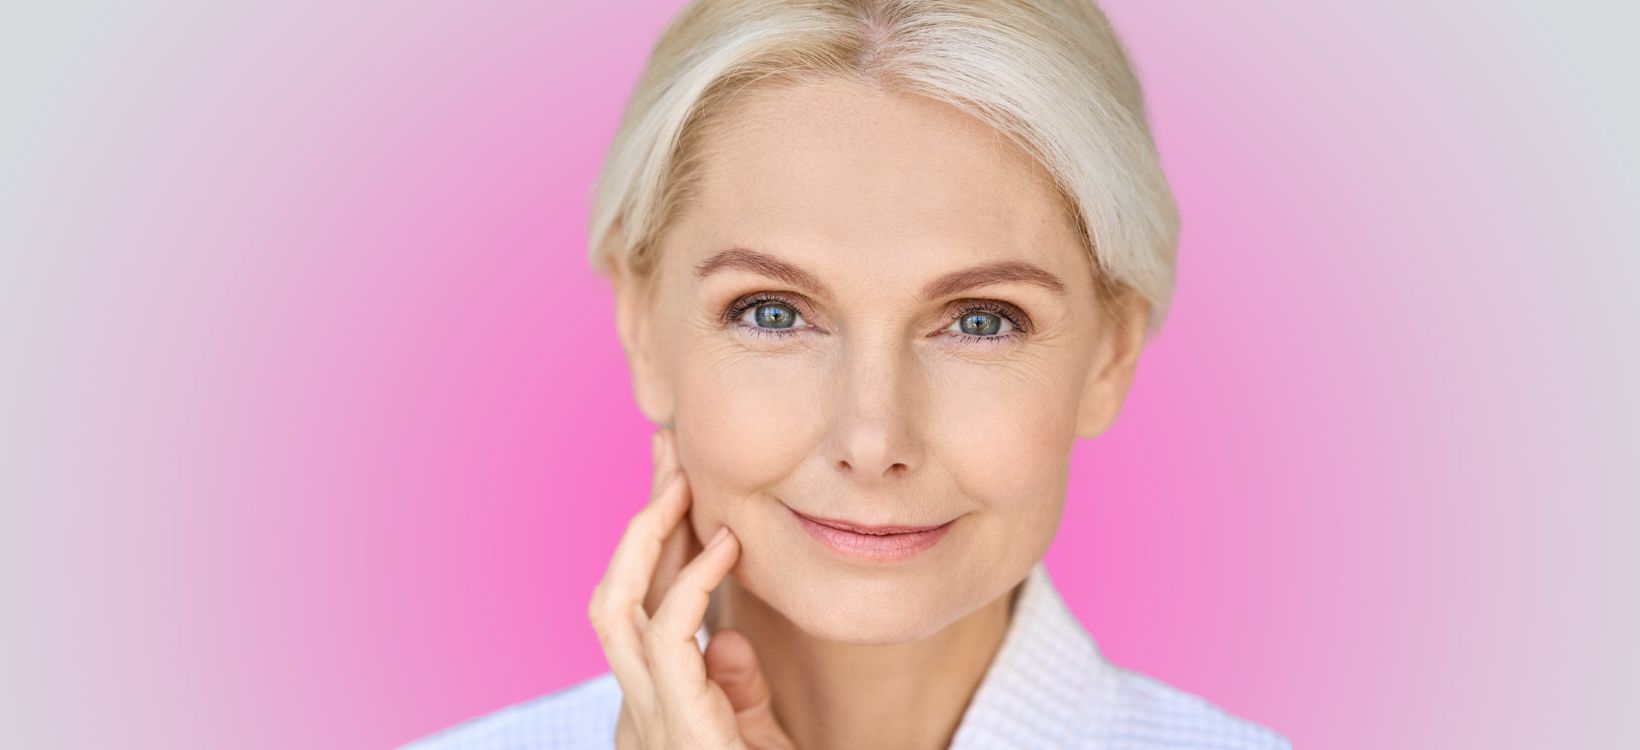 The Science of How Light Therapy is Used for Anti-Aging